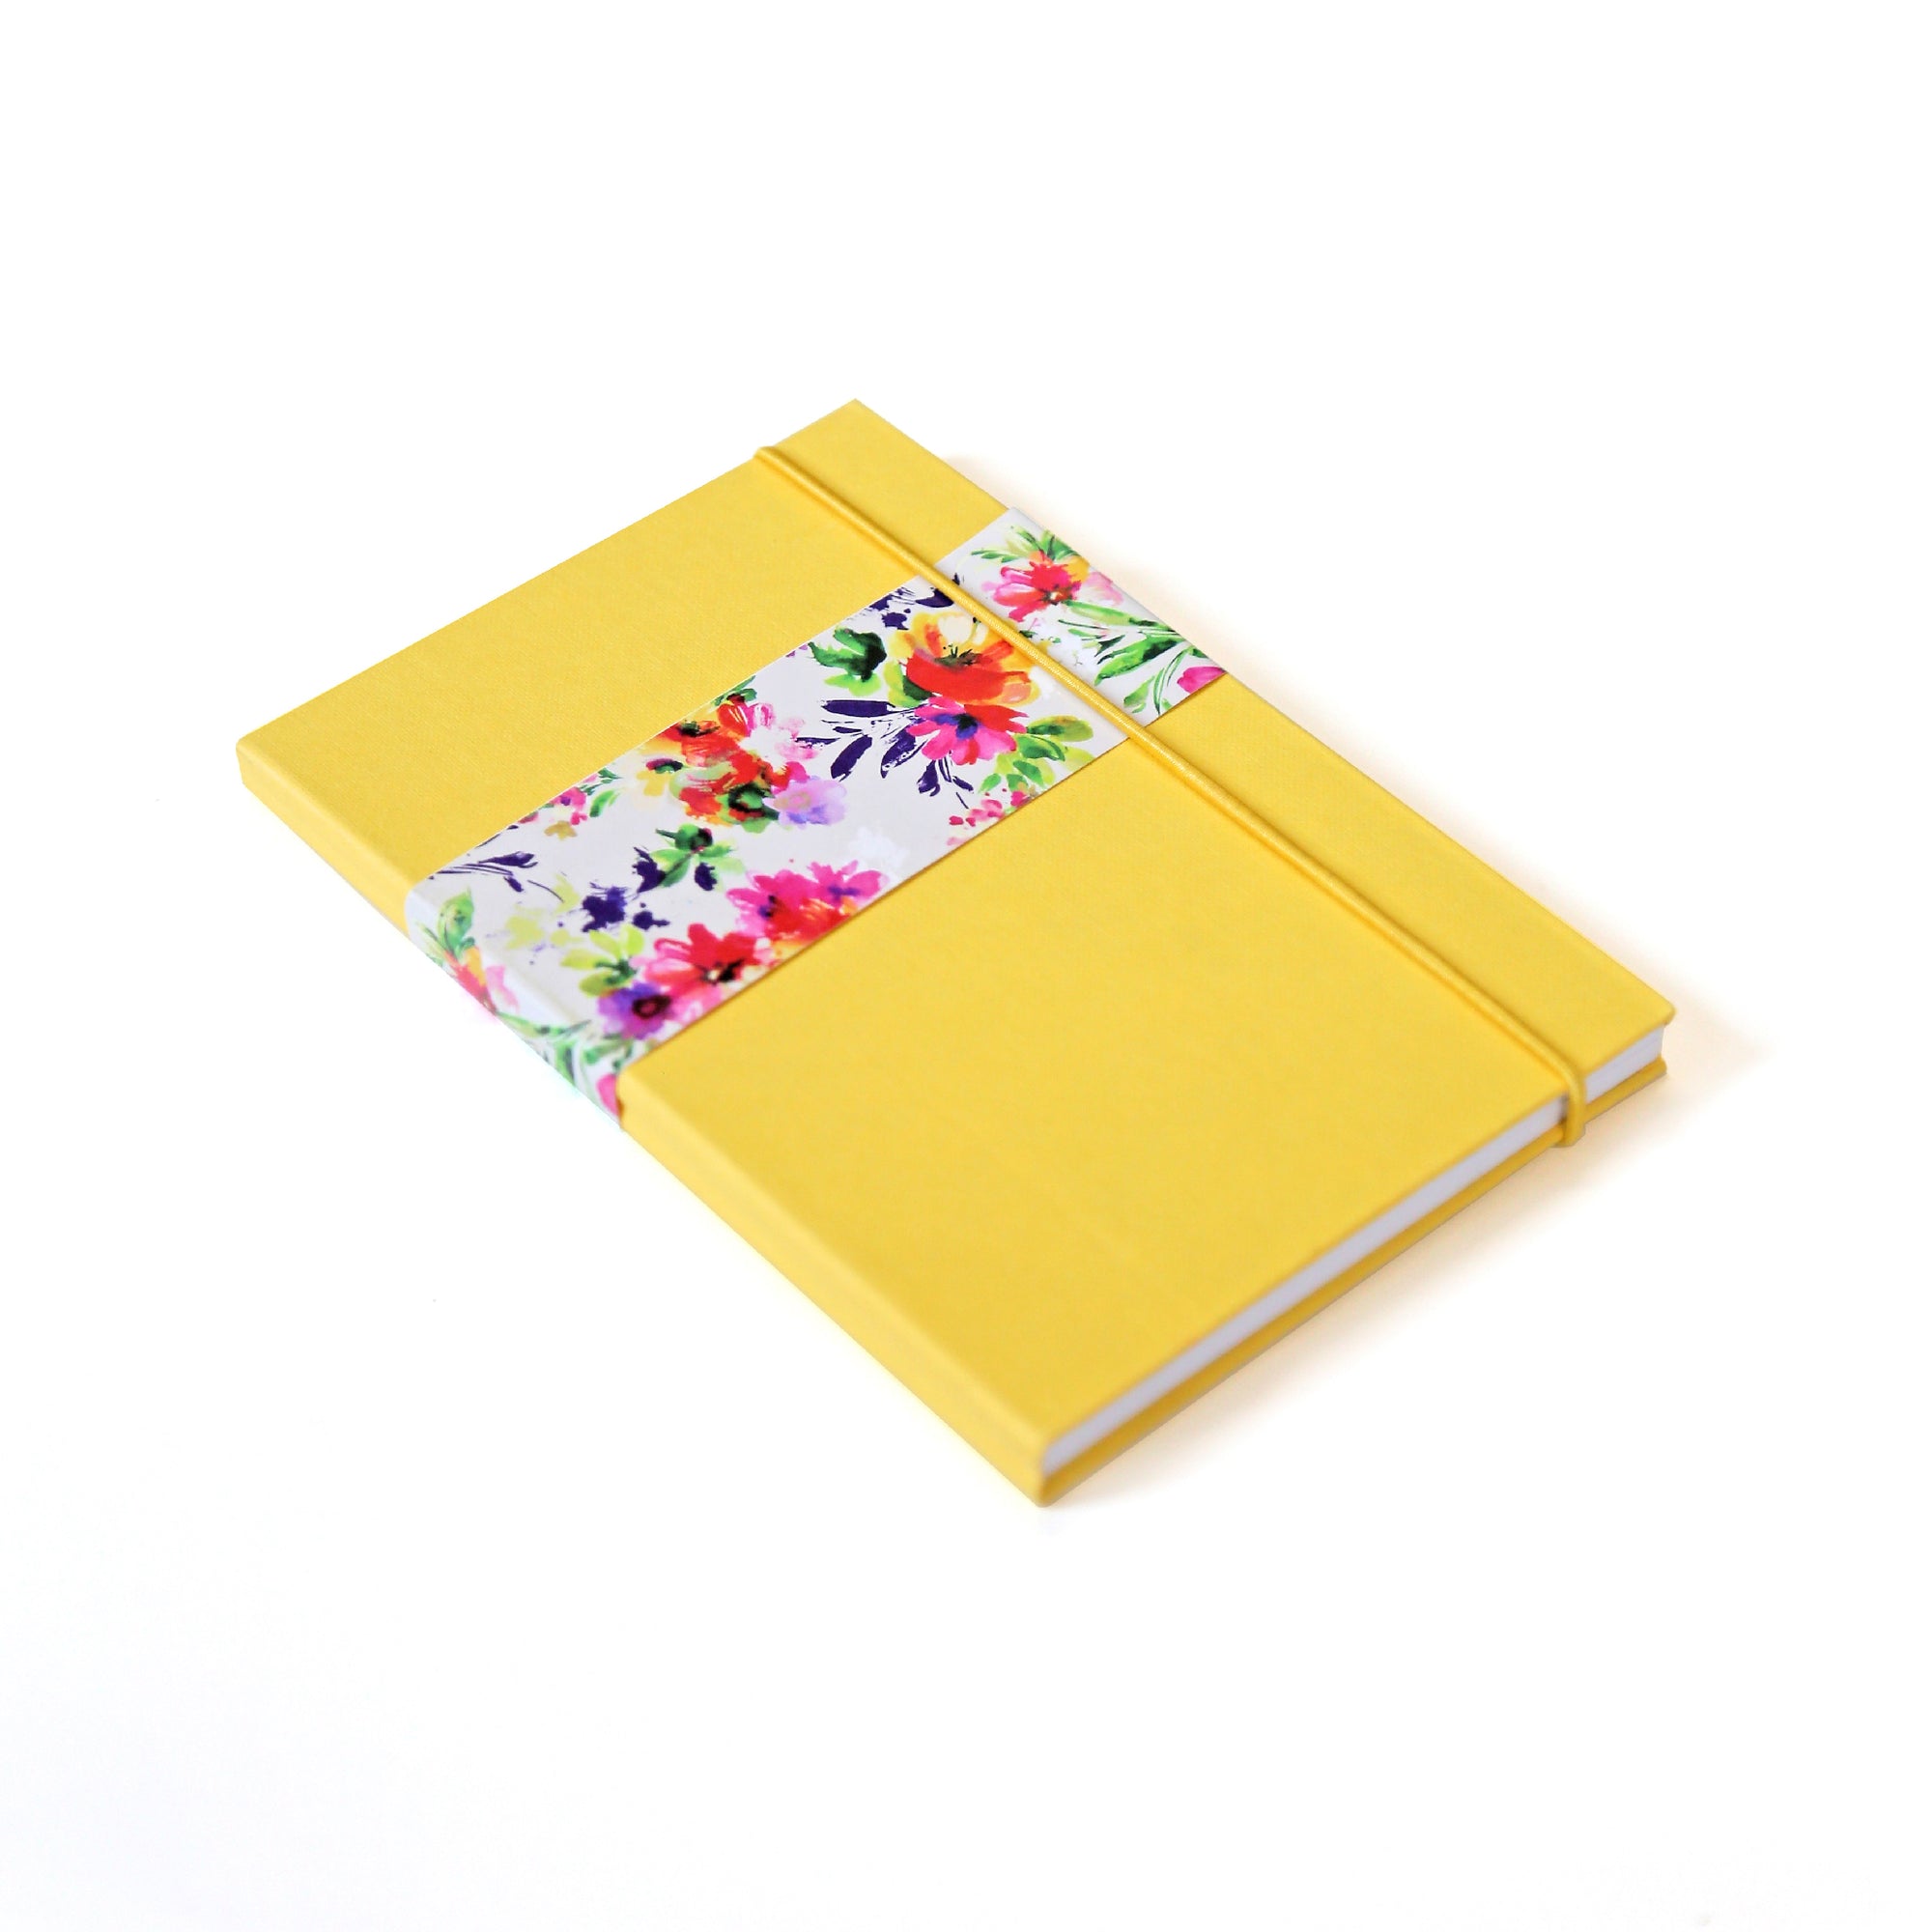 Pop Collective (Yellow) - 7mm - Fine Paper Stationery